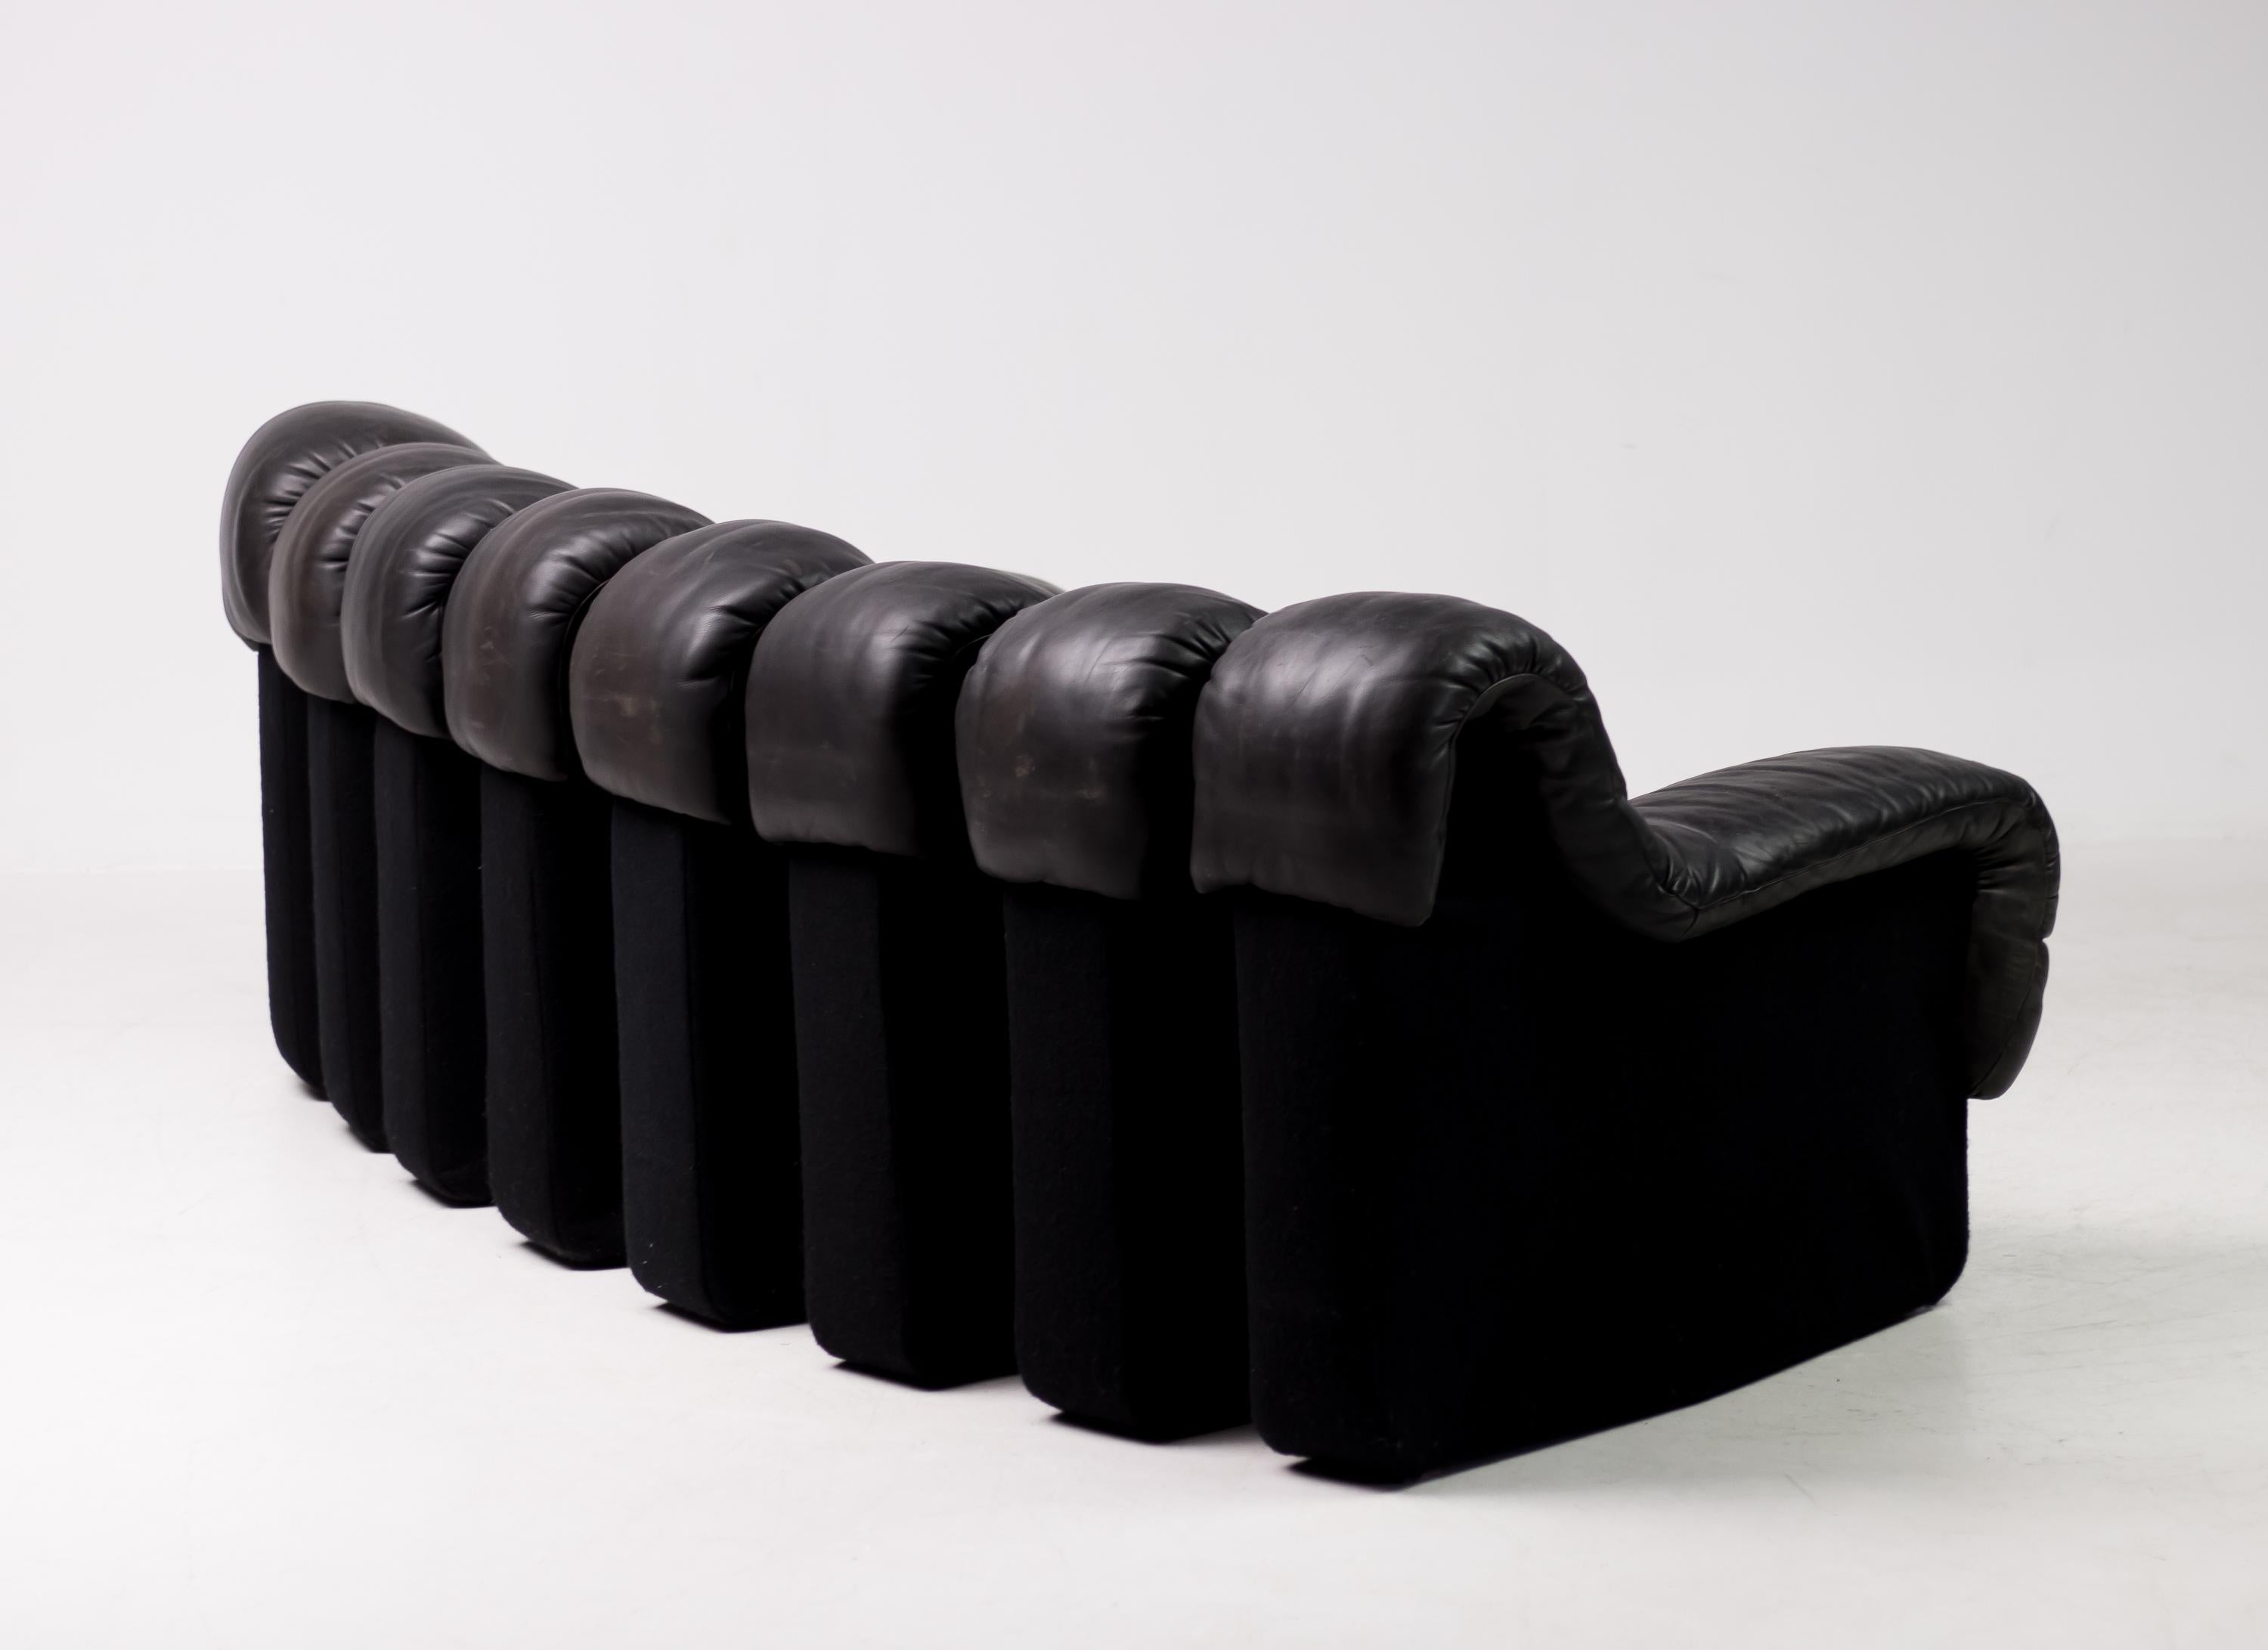 Iconic vintage DS 600 nonstop sectional leather sofa designed by Heinz Ulrich, Ueli bergère and Elenora Peduzzi-Riva and manufactured by De Sede. The sofa sections consist of original black leather and black felt bases.
The distressed leather shows